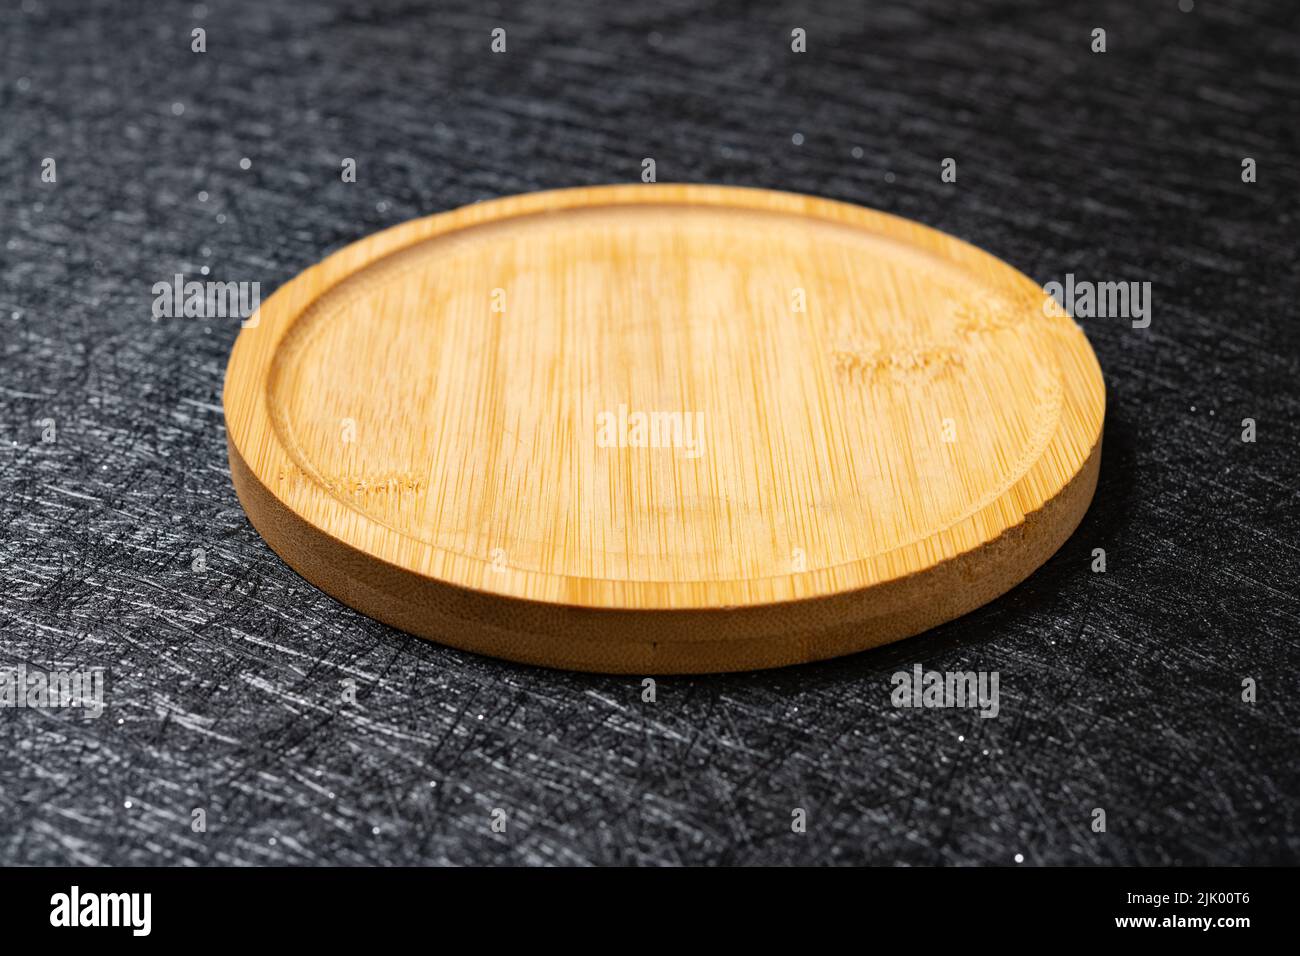 angle view empty wooden dish Stock Photo